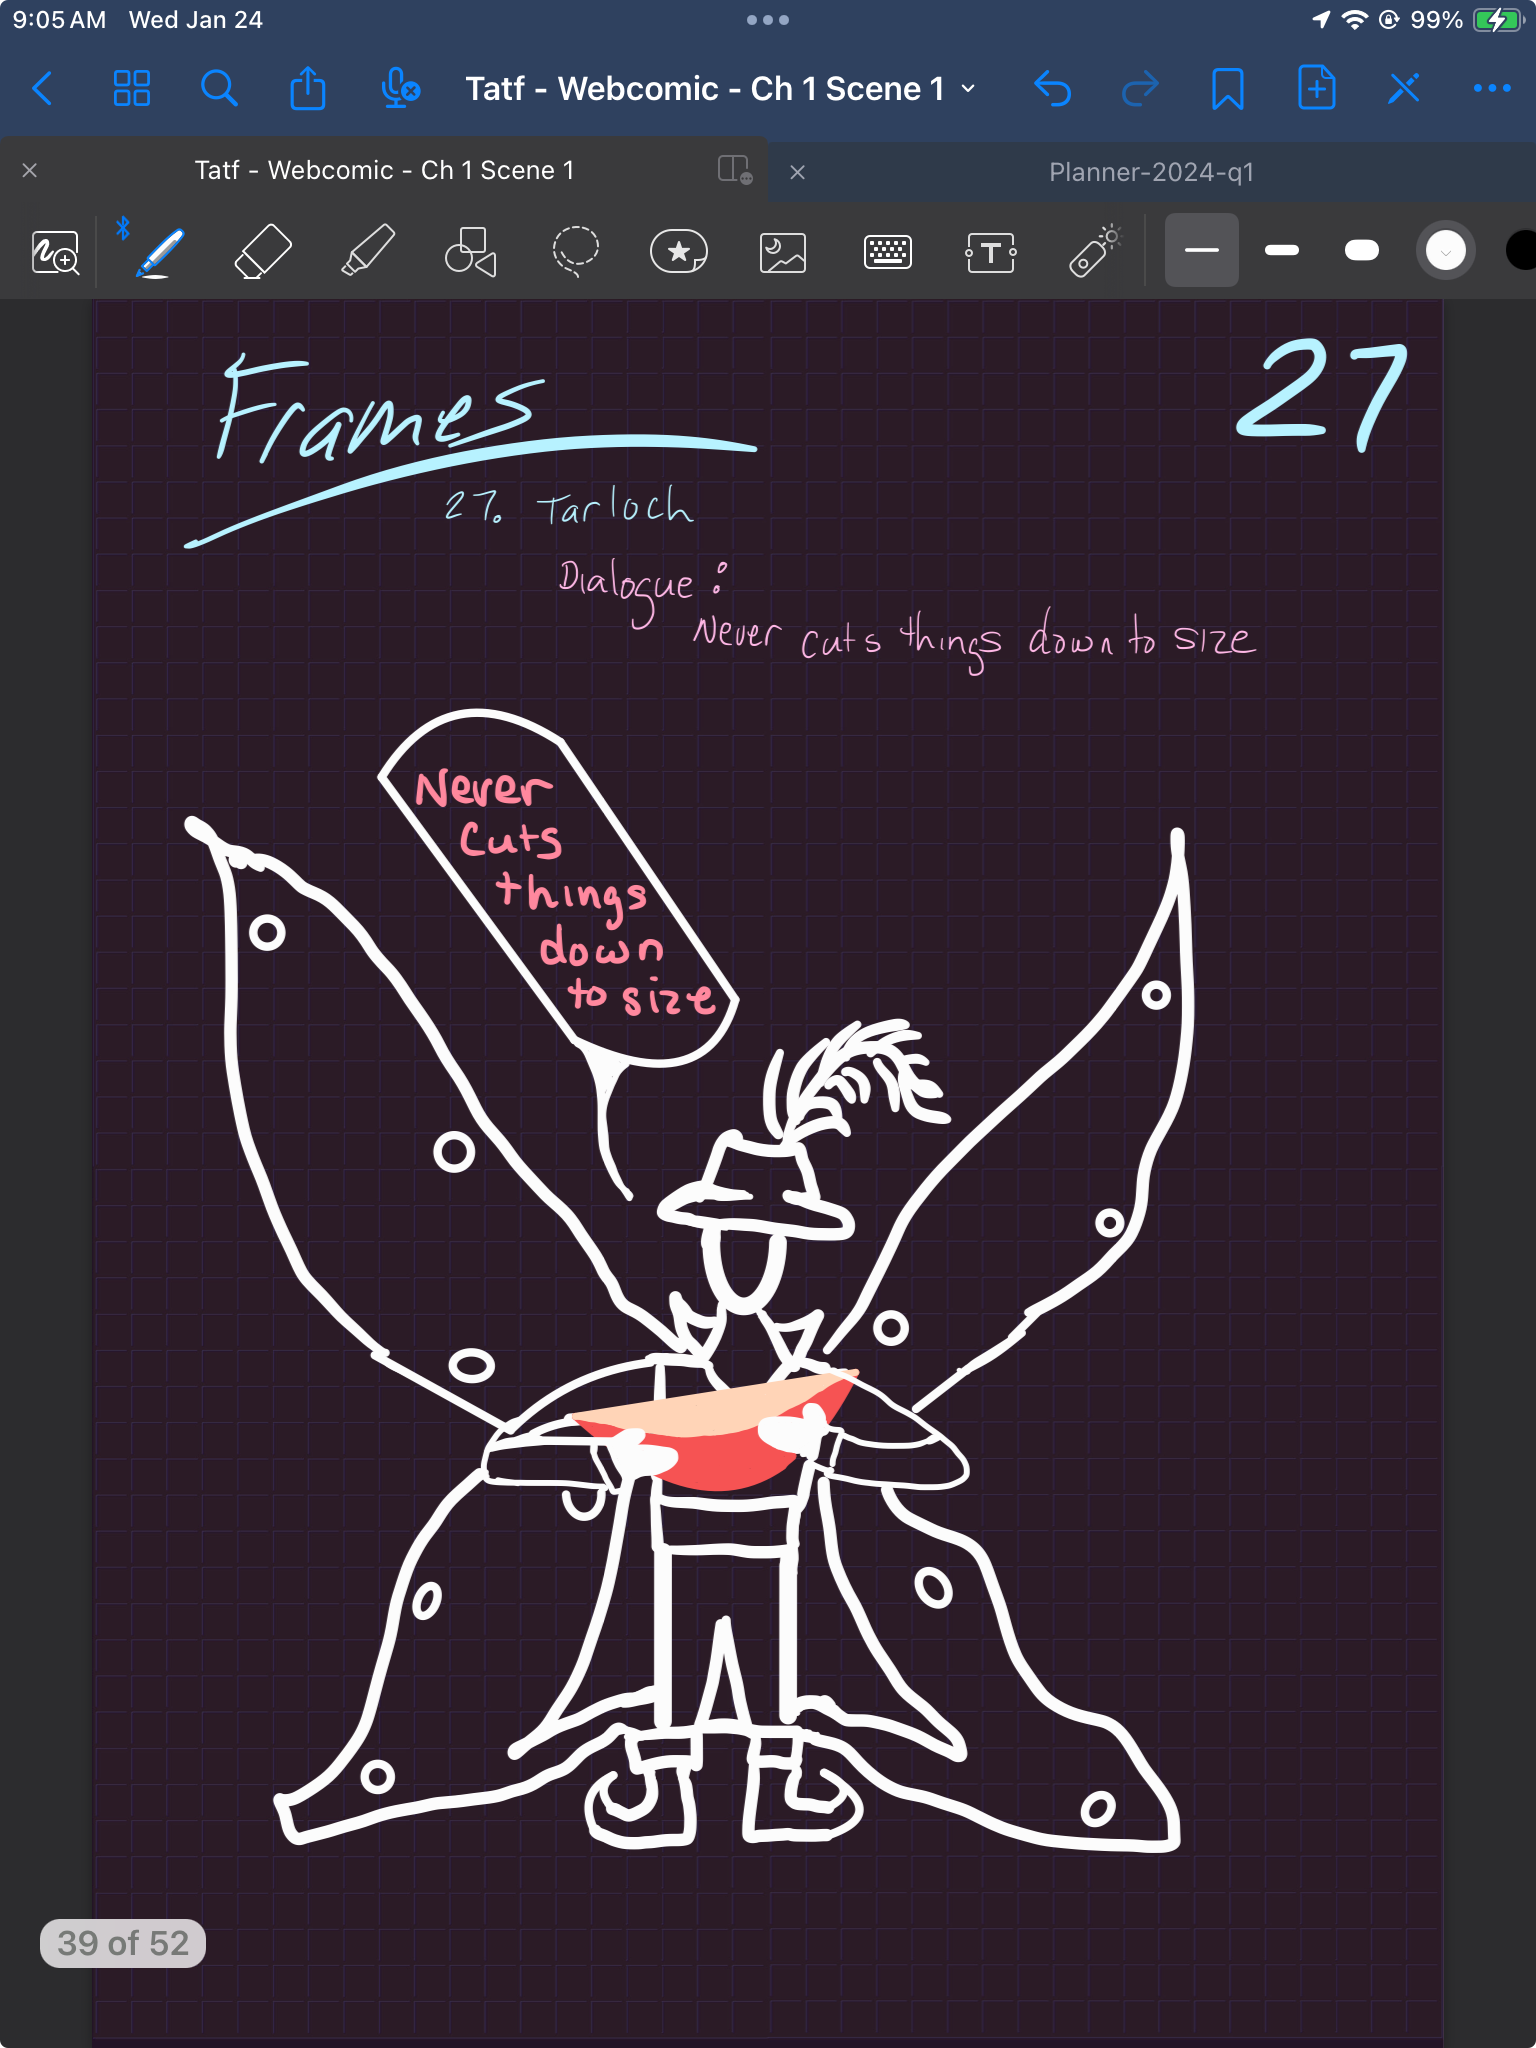 Project: Todd and the Fae WebComic : Frame 27